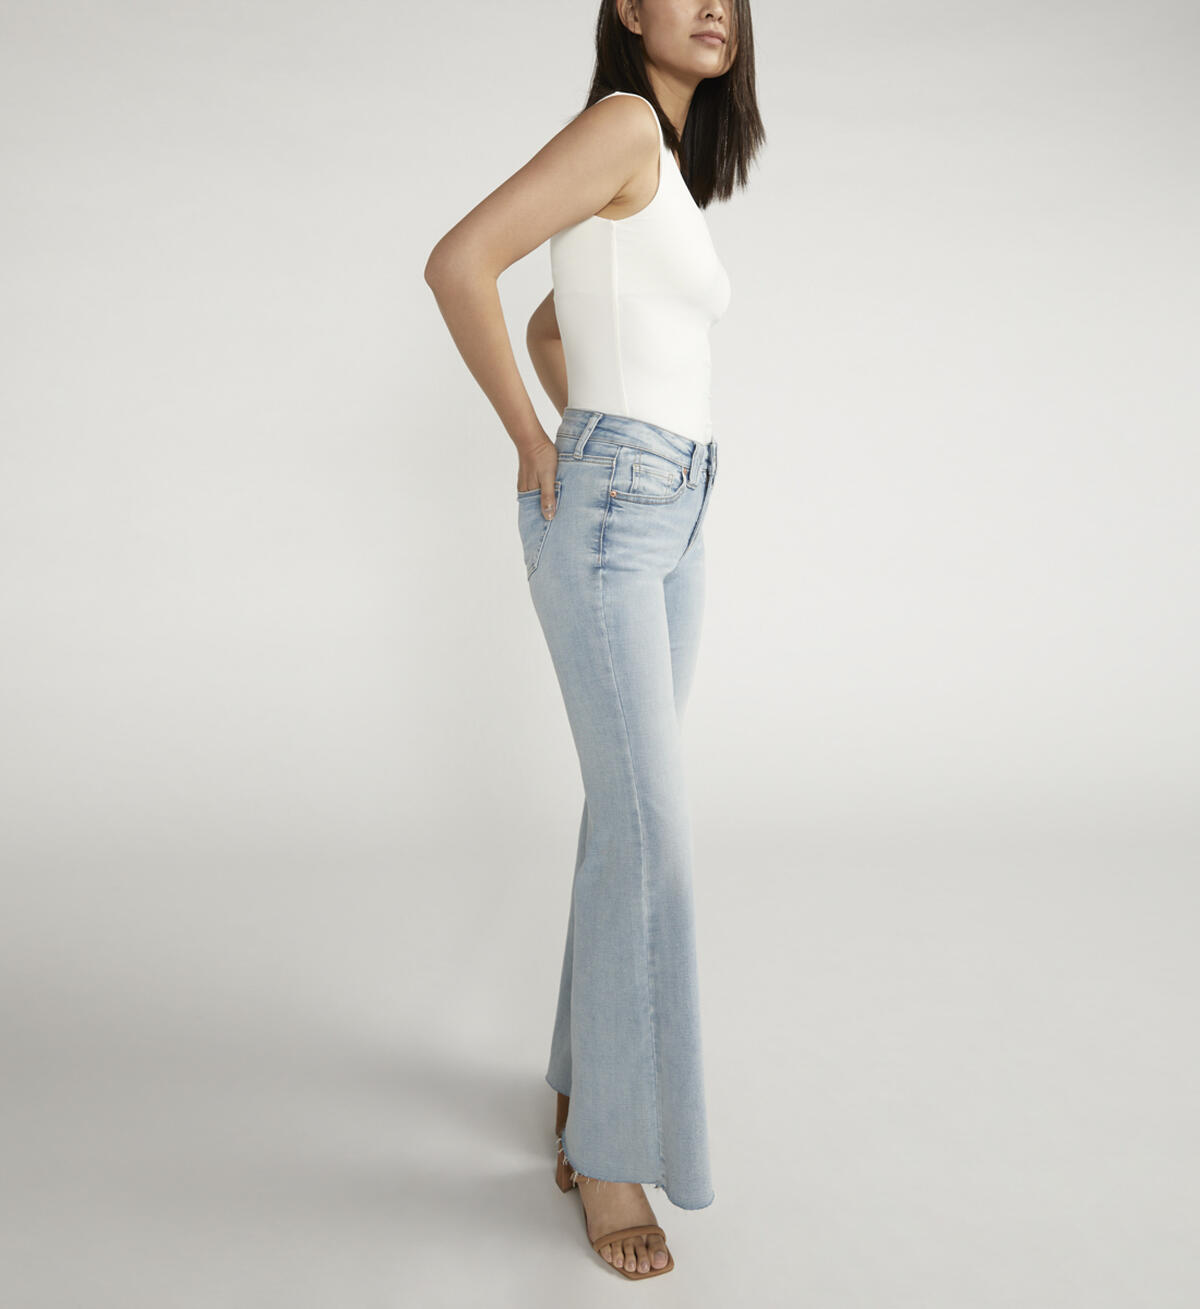 Suki Mid Rise Flare Jeans, , hi-res image number 2